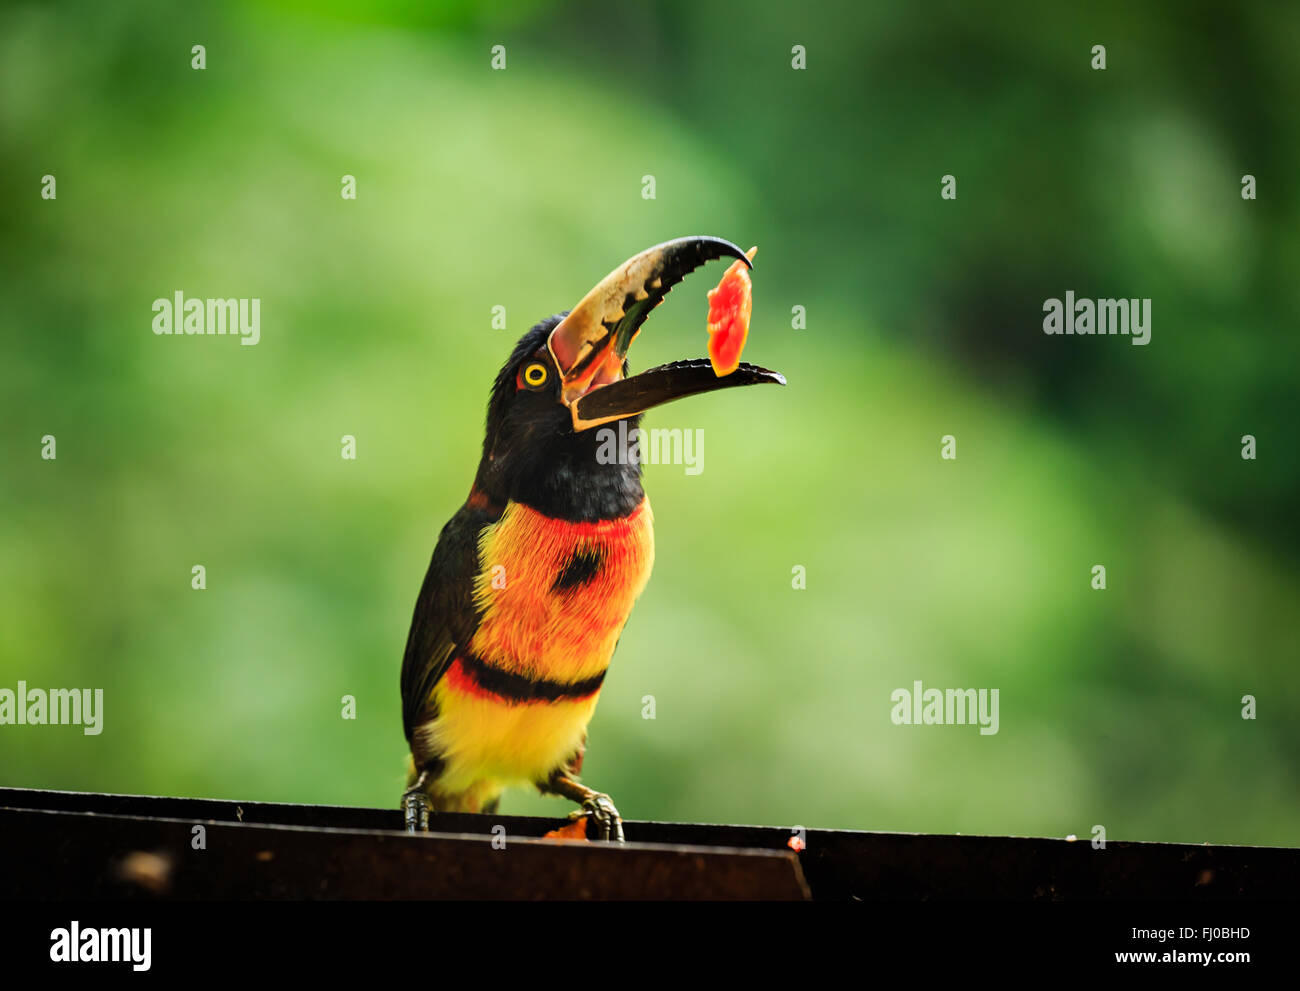 Close up of Wild green-billed red-breasted toucan, Ramphastos dicolorus, eating papaya fruit Stock Photo